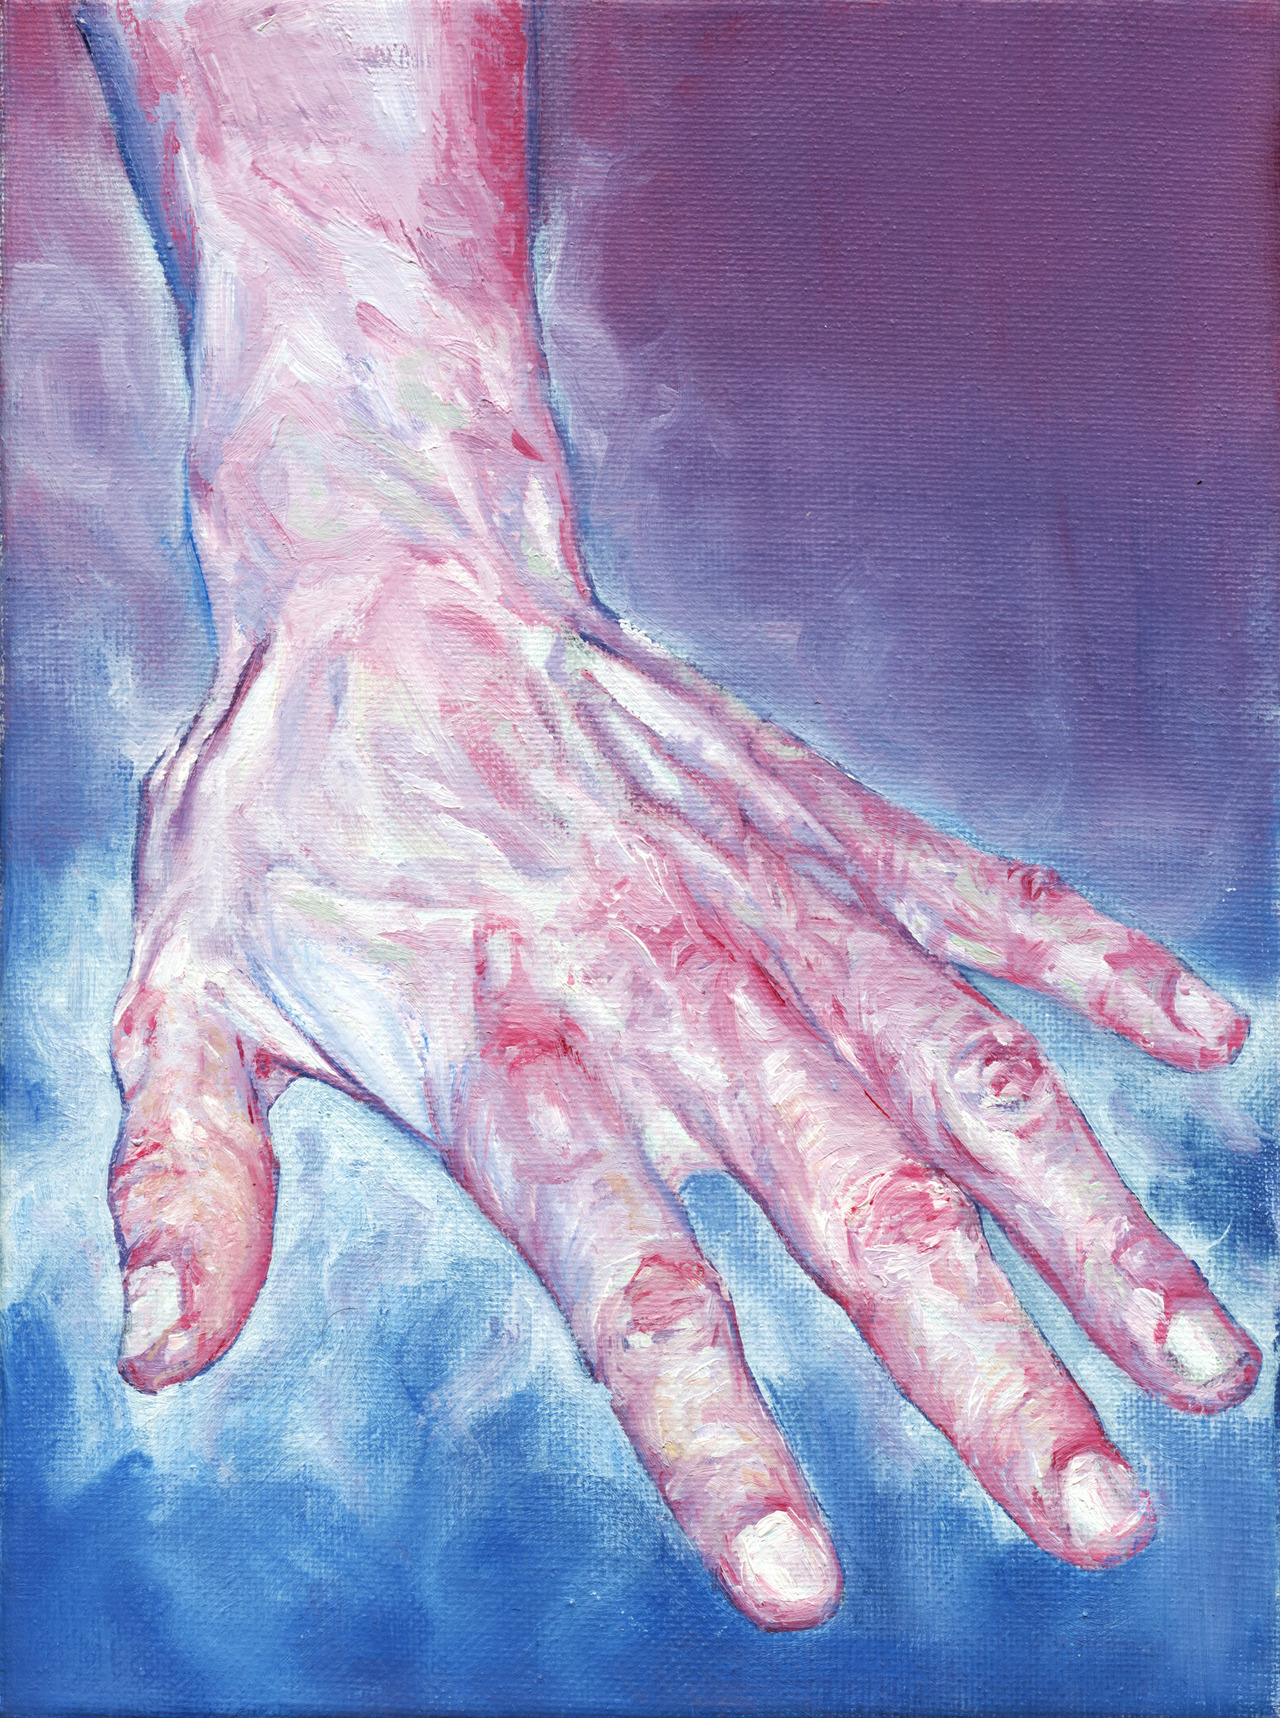 Oil hand study on canvas (7x9") by Tom Wolf Tumblr! Website Instagram: @wolfiosg Facebook — Immediately post your art to a topic and get feedback. Join our new community, EatSleepDraw Studio, today!